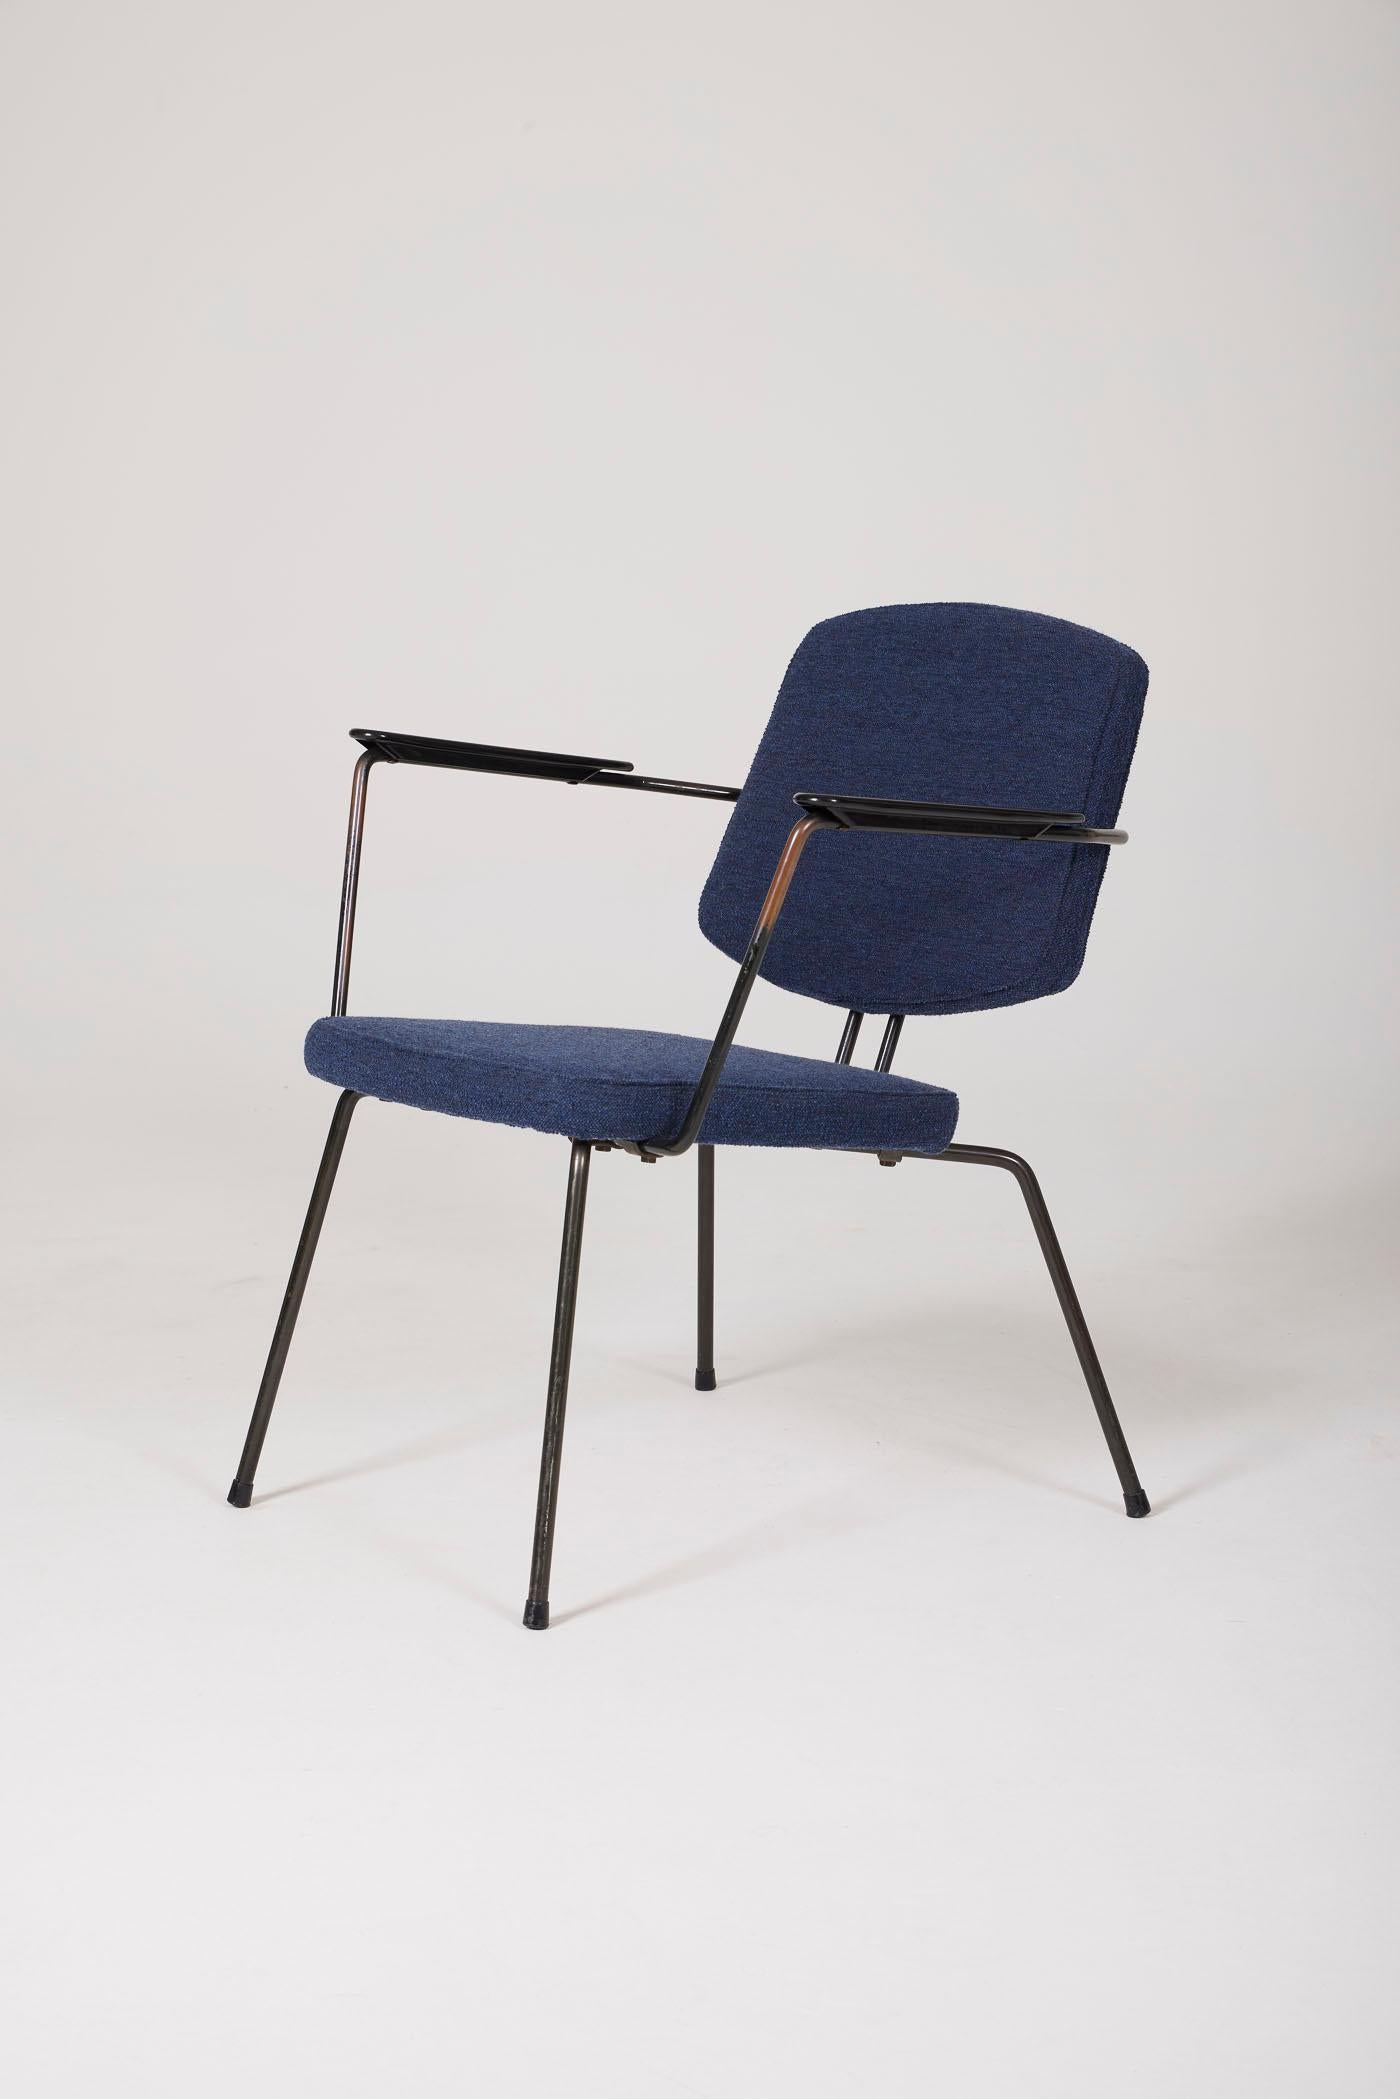  Armchair by Dutch designer Rudolf Wolf for Elsrijk, 1950s. This armchair has been reupholstered in blue woolen fabric. The armrests are made of bakelite. The tubular structure is in black lacquered metal. Two armchairs available. In perfect